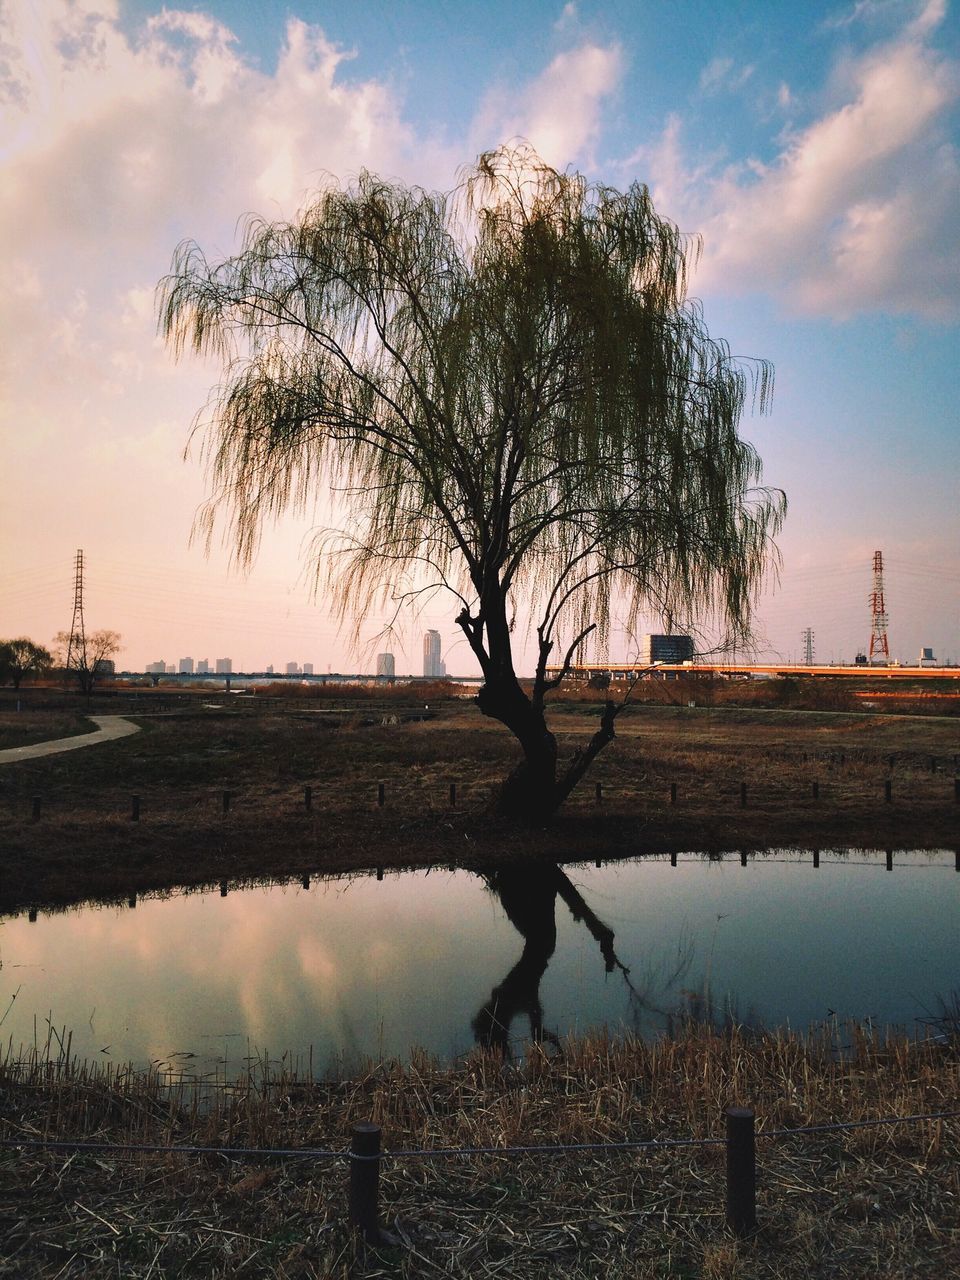 water, sky, reflection, tree, lake, tranquility, cloud - sky, bare tree, tranquil scene, nature, scenics, cloud, river, beauty in nature, standing water, branch, outdoors, built structure, lakeshore, no people